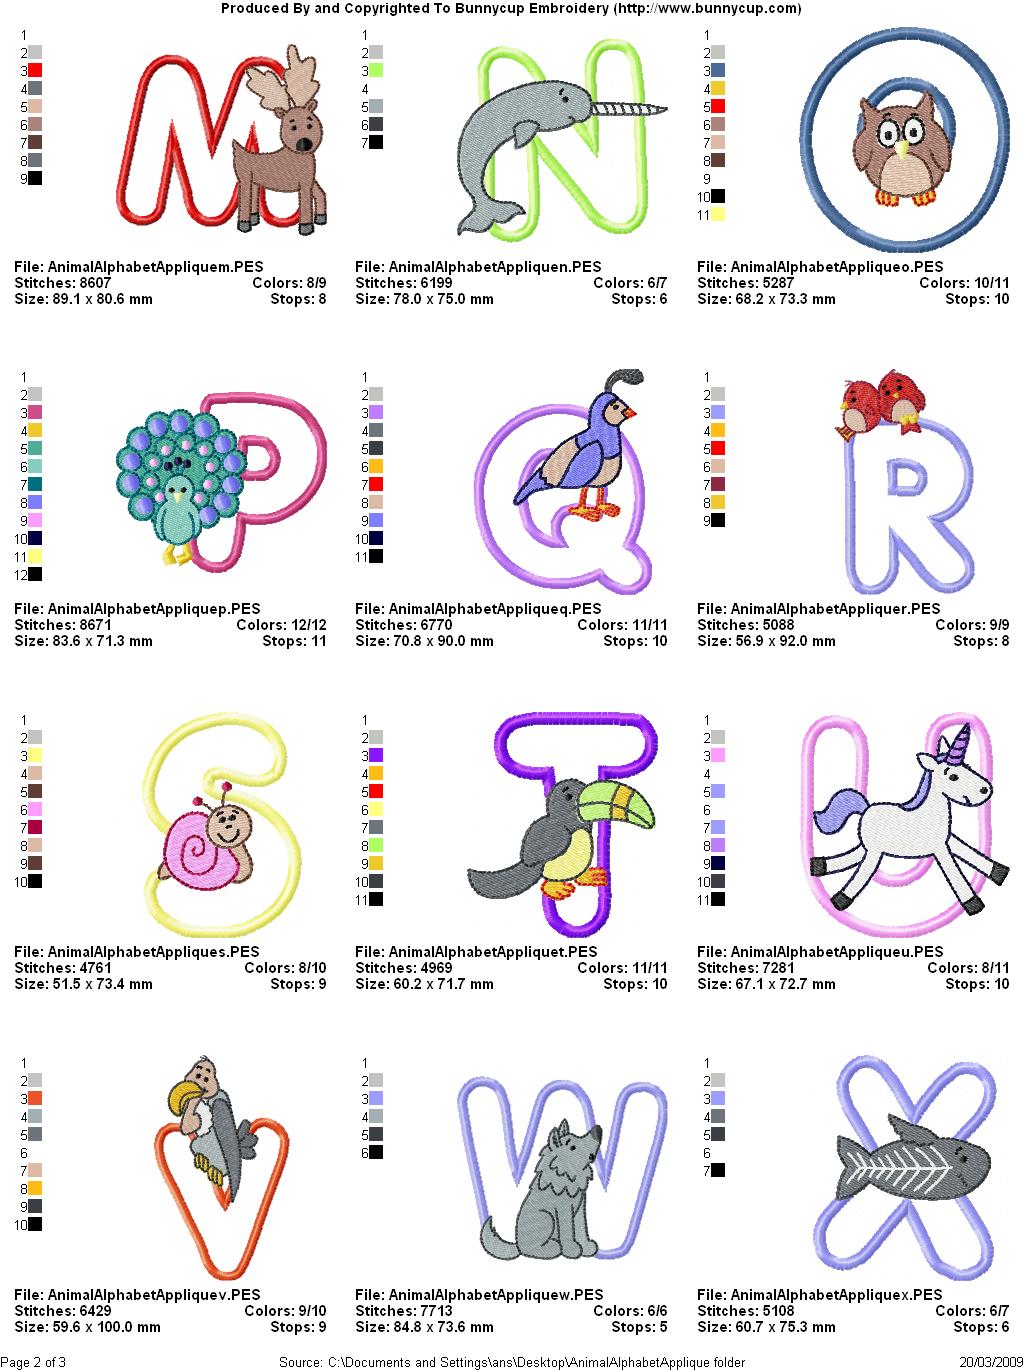 Sewn by Joan(TM) - Free Machine Embroidery Design Links: Alphabets